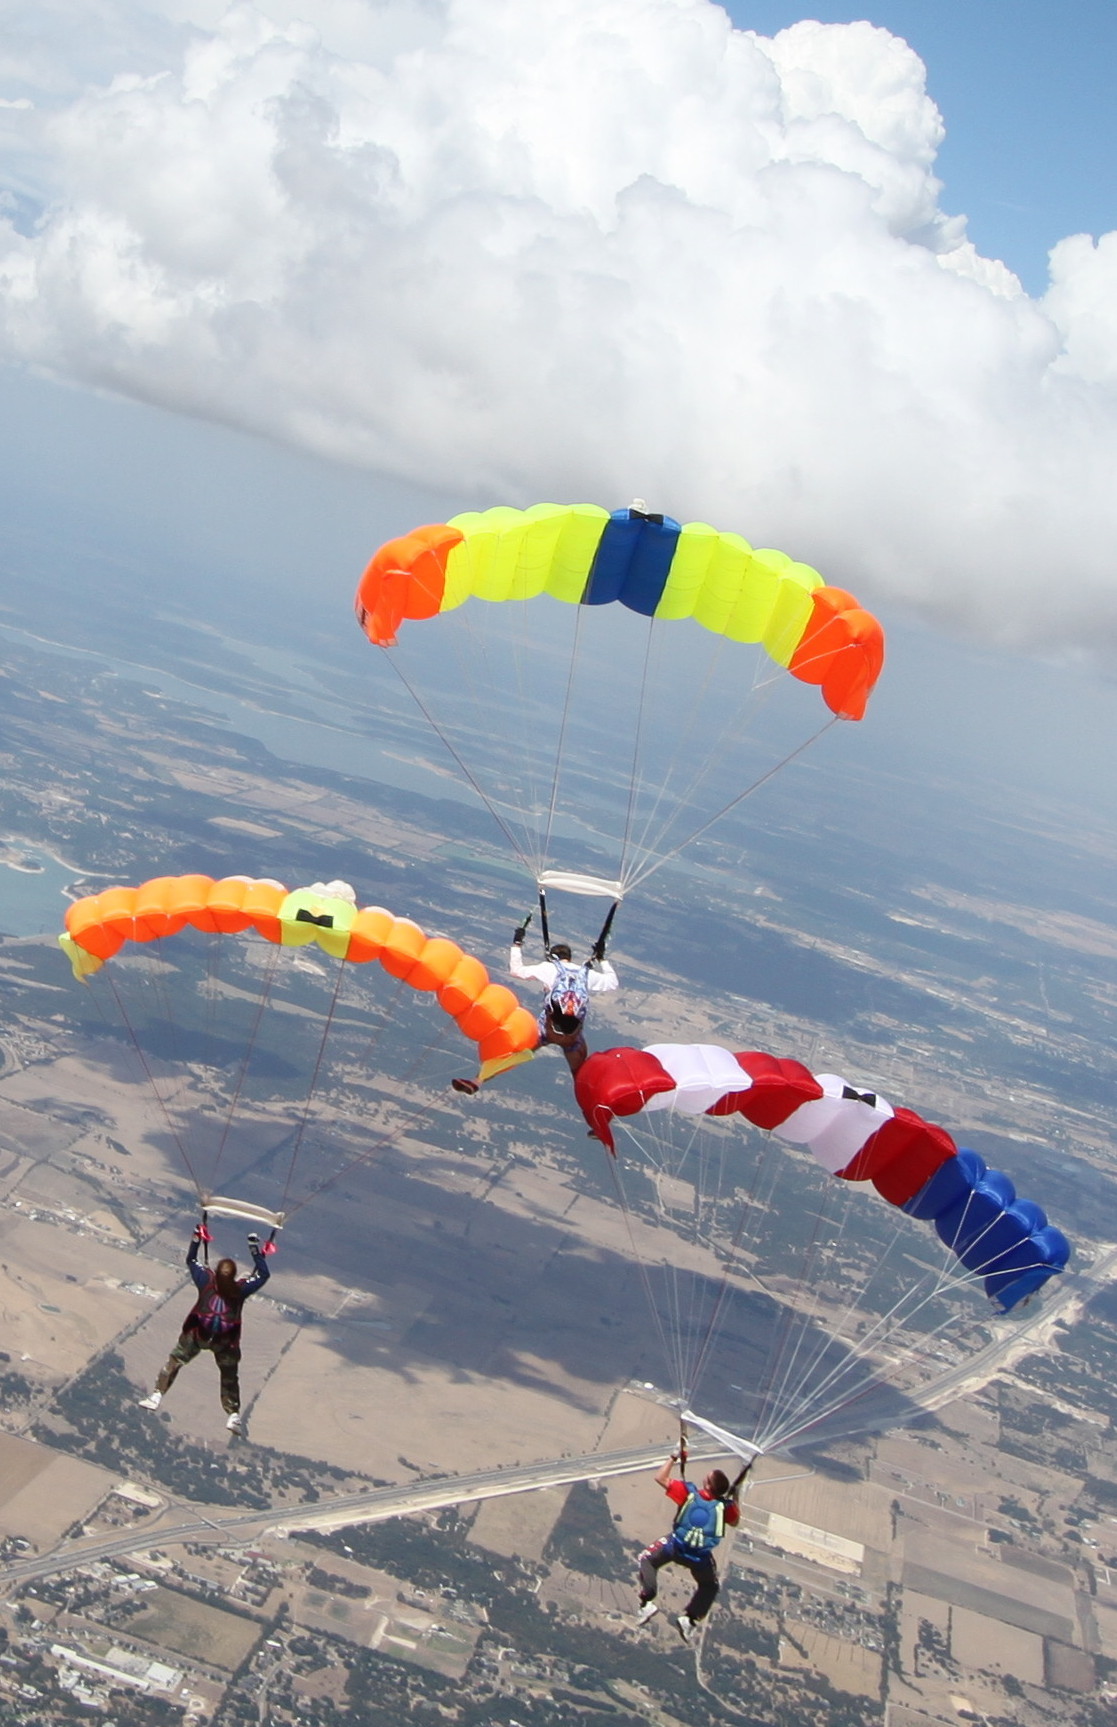 Canopy Formation at Skydive Temple